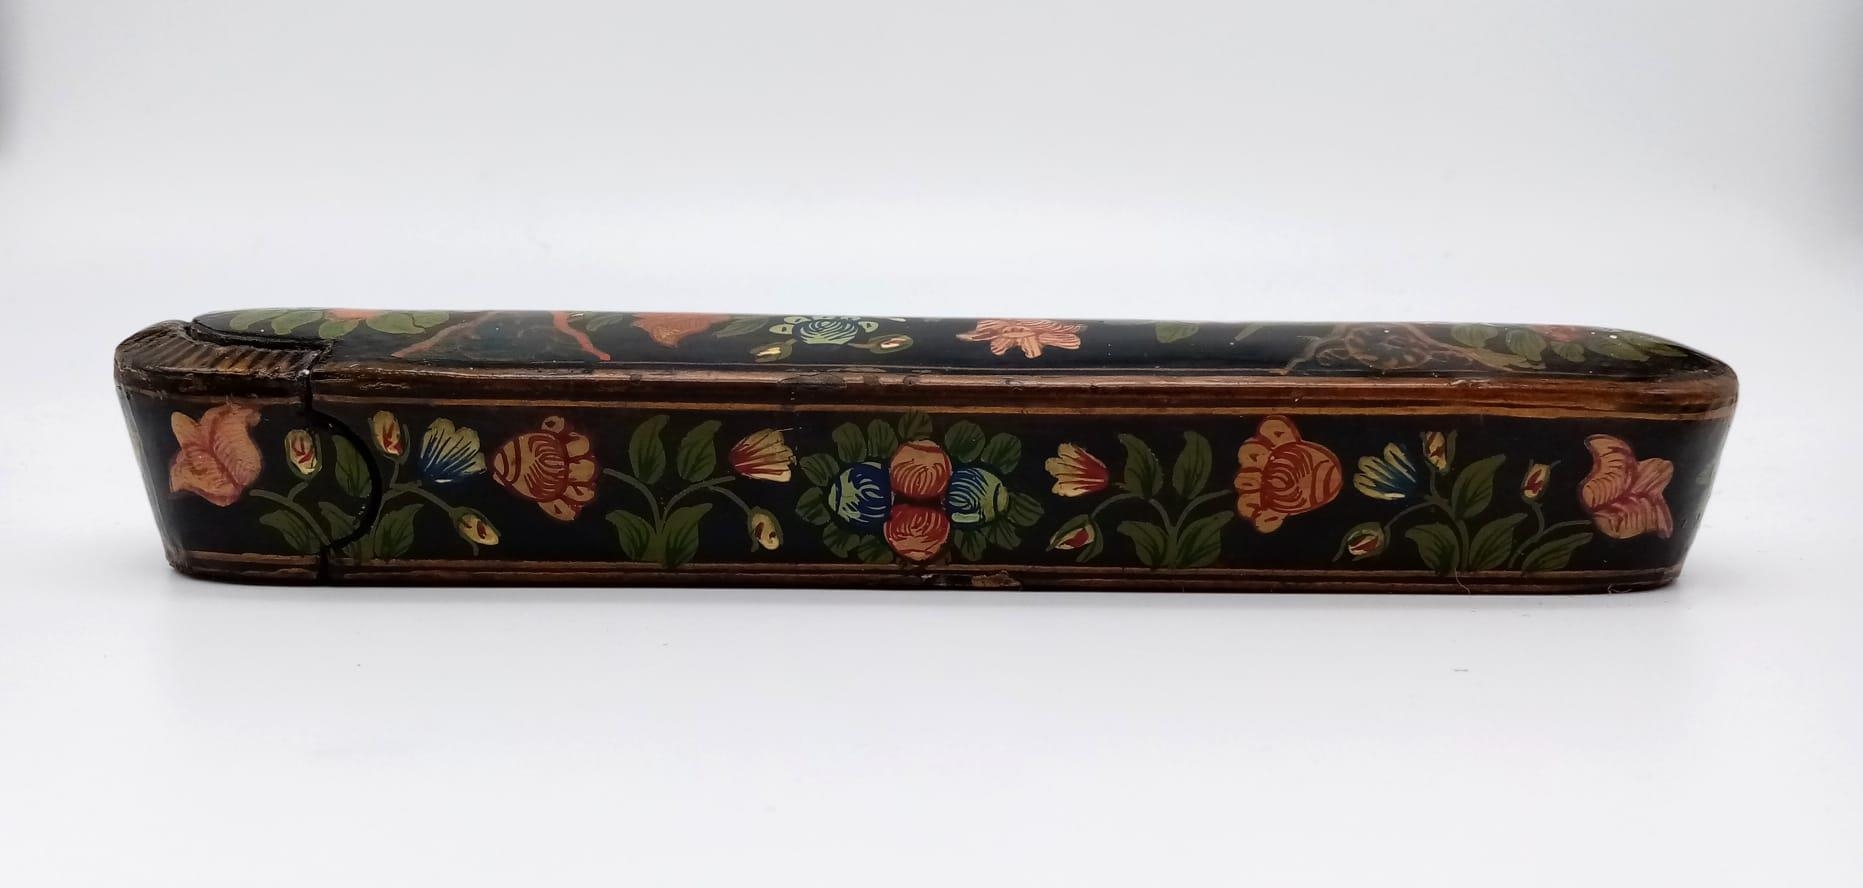 An early Persian Islamic Ghajavi pen box, known as Gol o Bol Boll. Hand painted with flowers and - Image 7 of 7